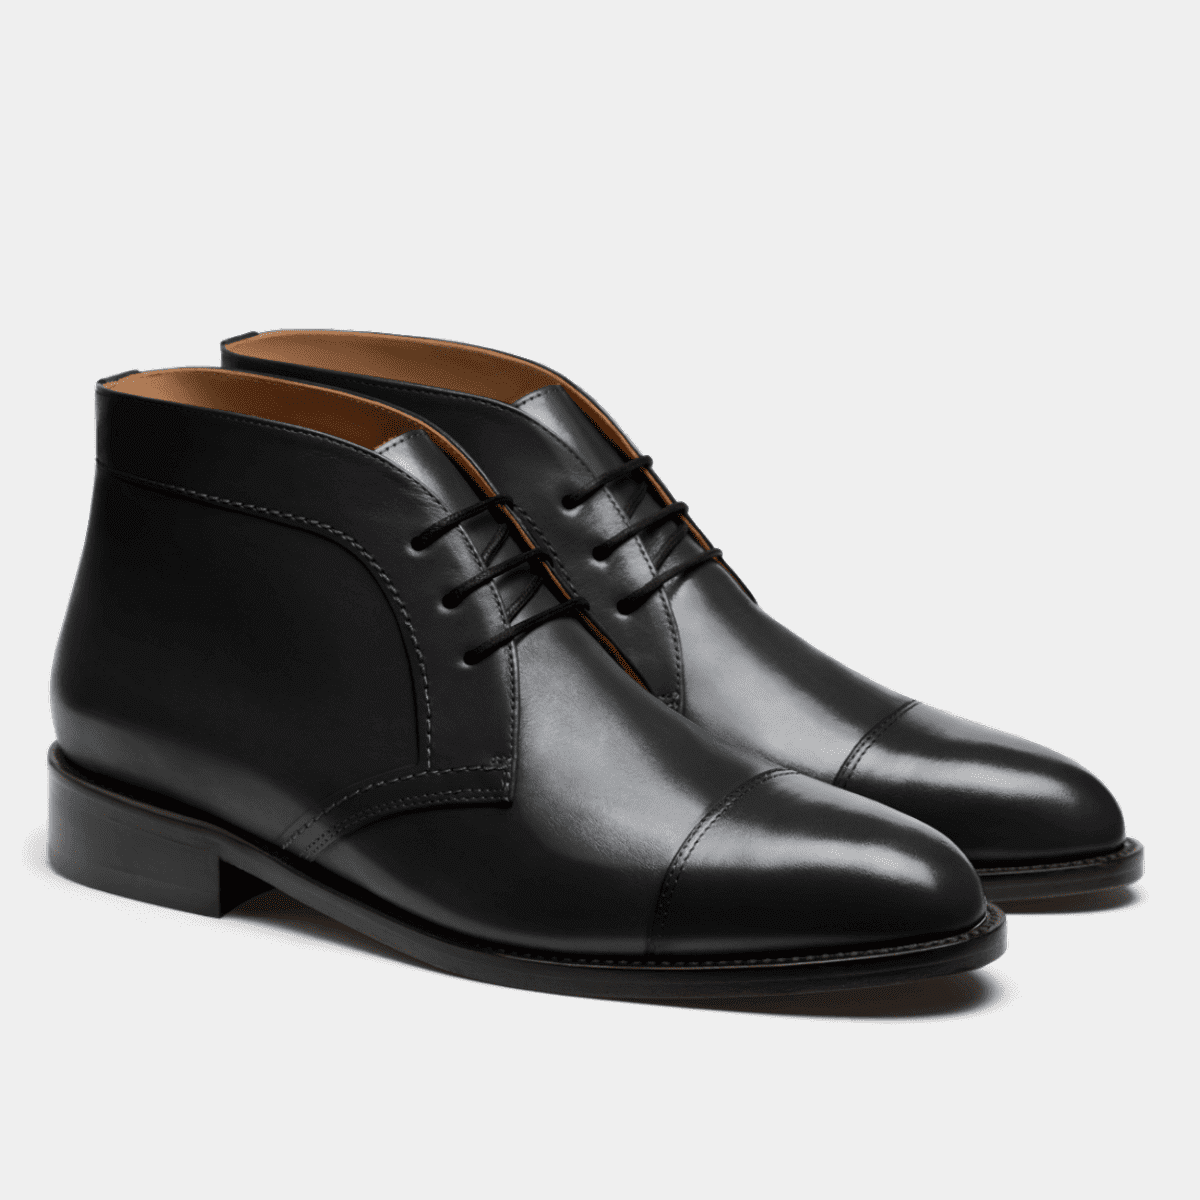 Black Chukka Boots | The Essential Black Boots - Hockerty